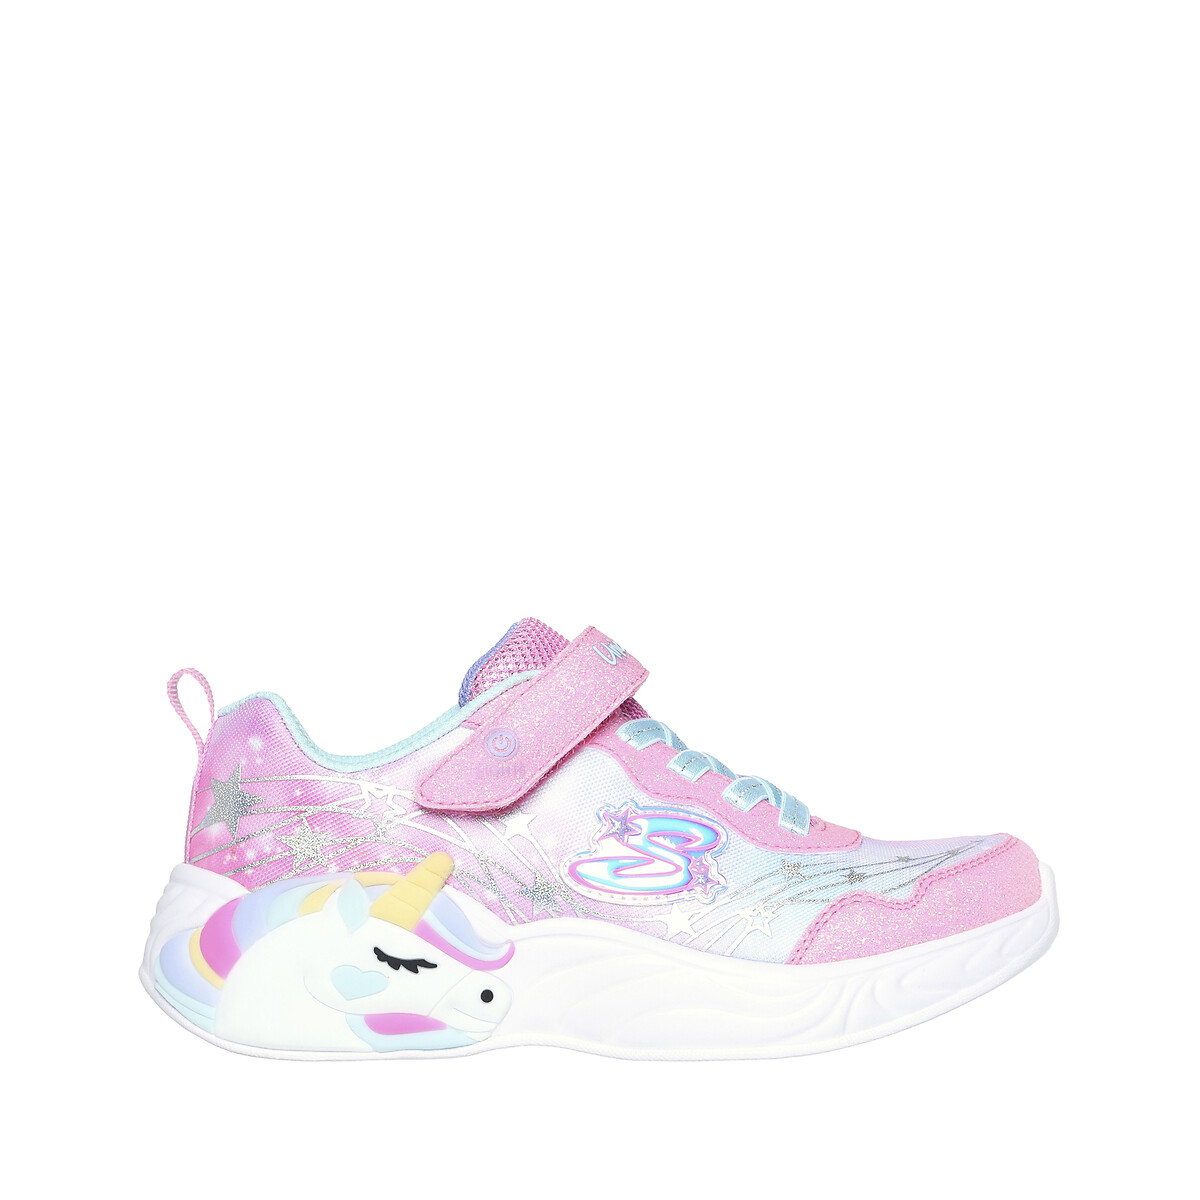 Kids Unicorn Dreams - Wishful Magic Trainers with Touch ’n’ Close Fastening